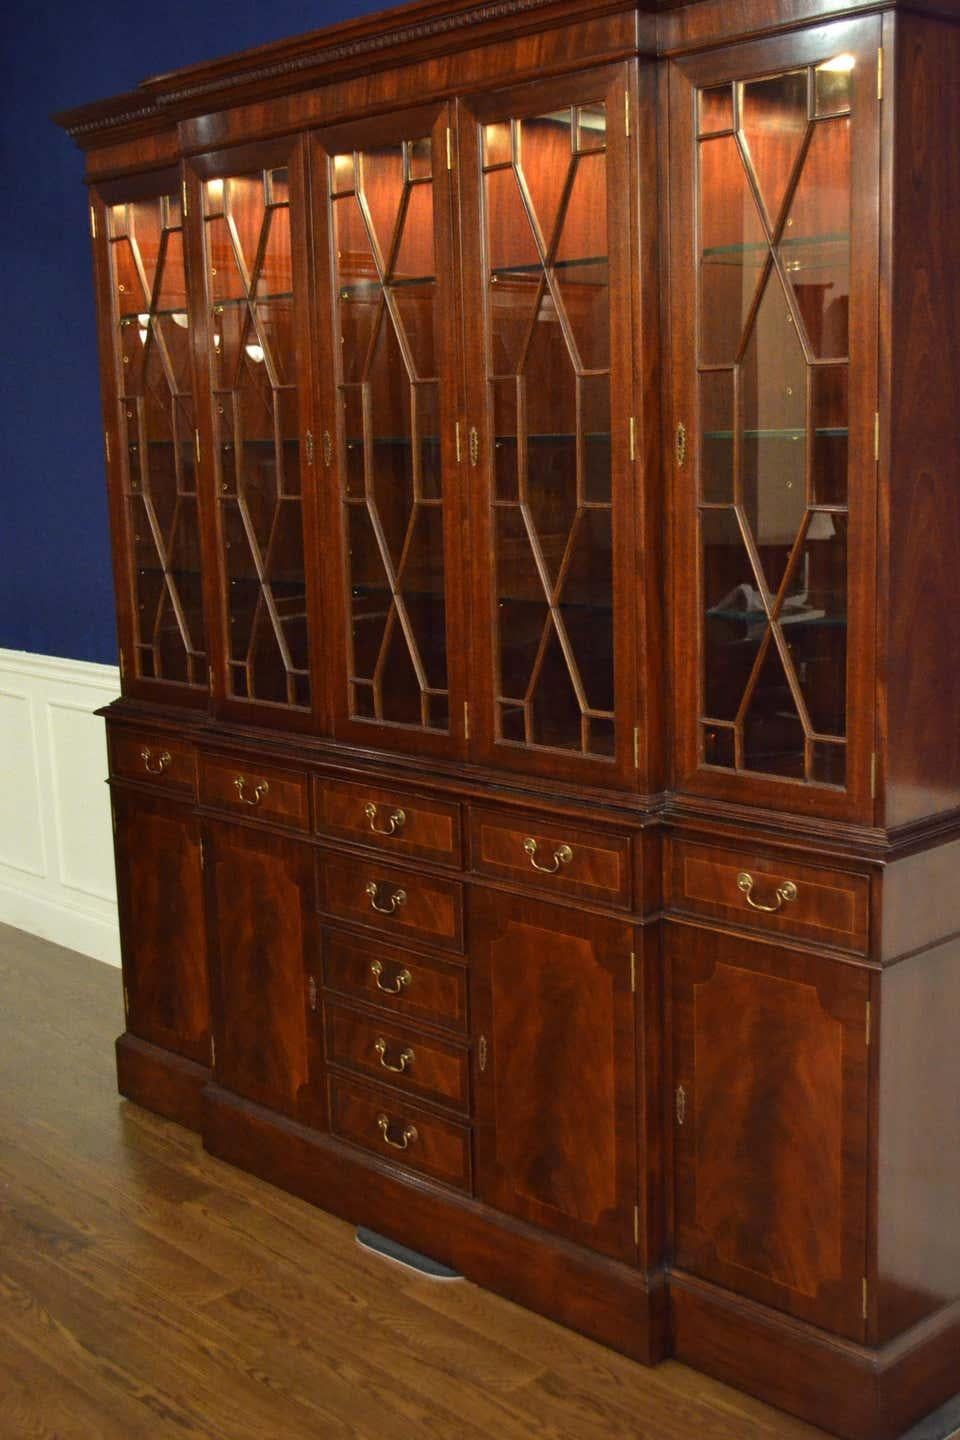 This is a large traditional mahogany breakfront bookcase or china cabinet with five doors by Leighton Hall. It features four bottom doors and nine drawers with swirly crotch mahogany fields and straight grain mahogany borders. The top doors feature